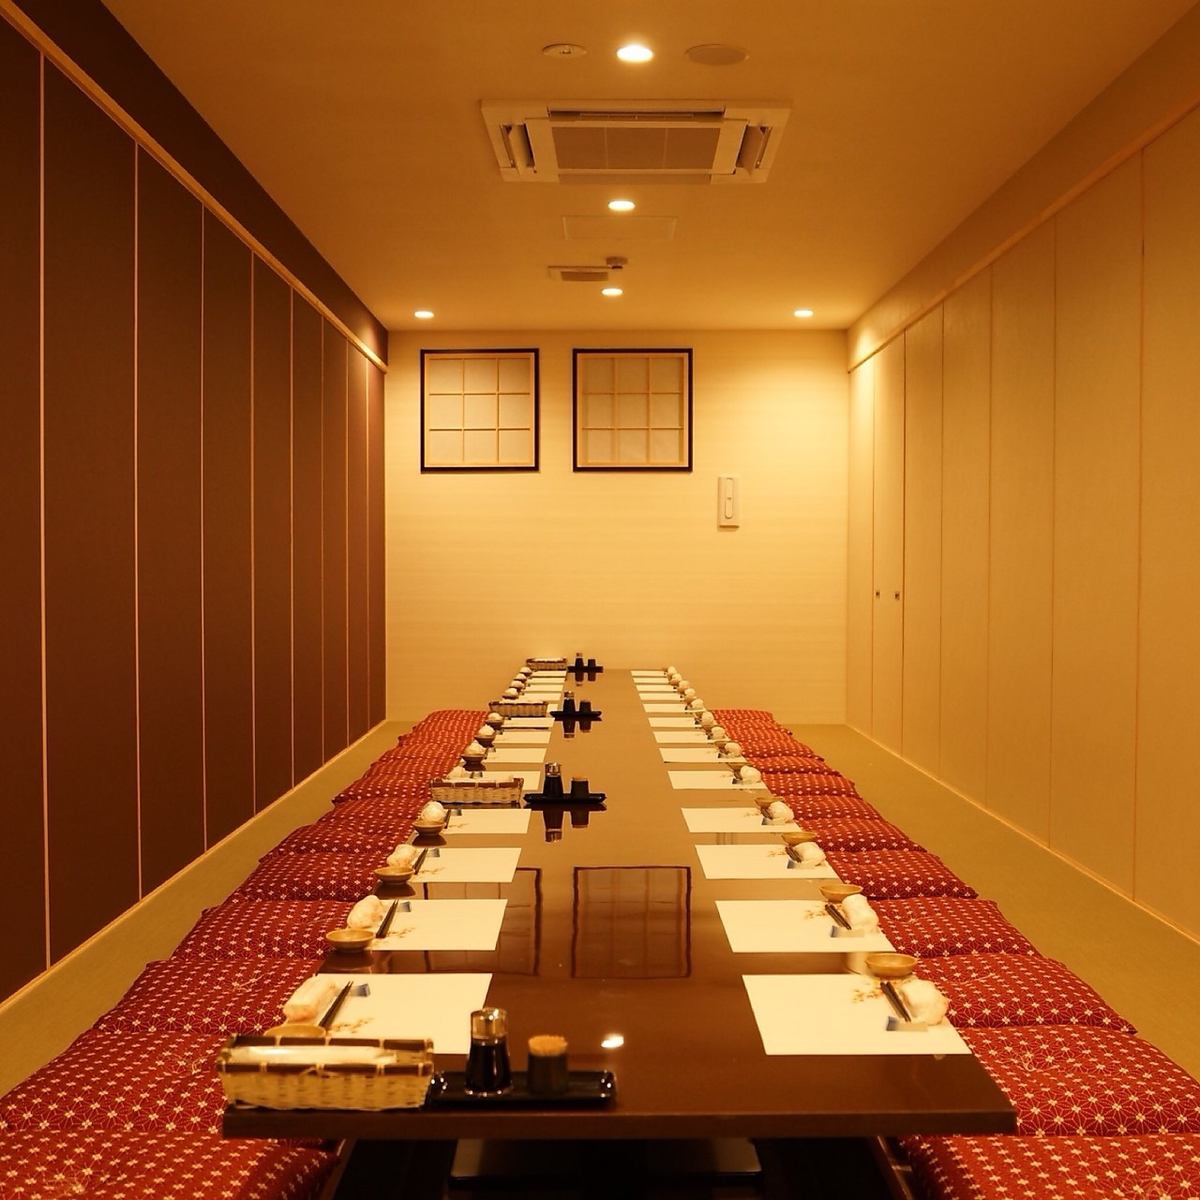 The banquet can be held by up to 150 people! You can enjoy a Japanese banquet in a spacious space ♪